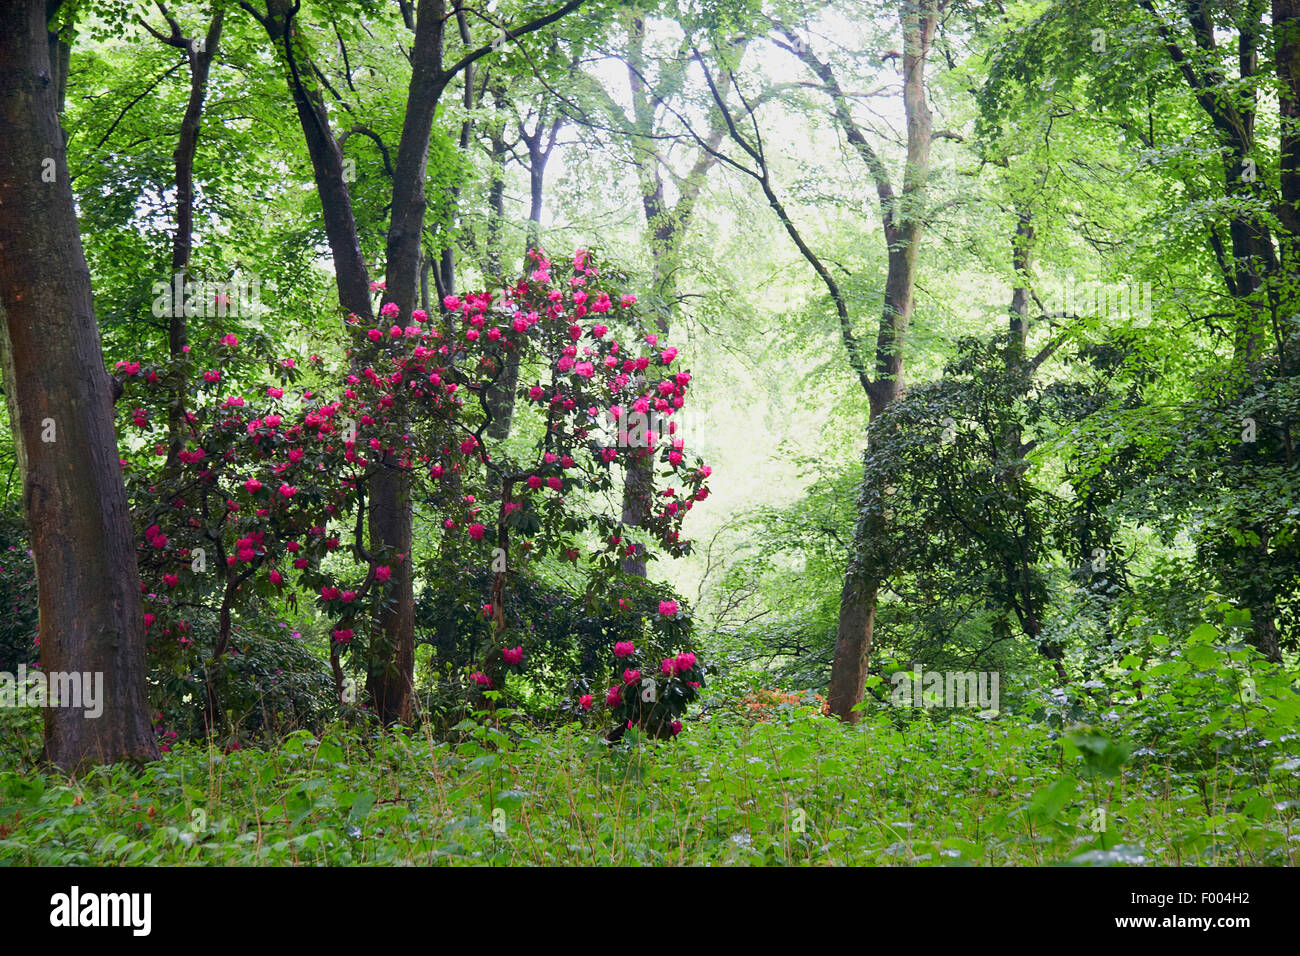 Rhododendron (Rhododendron spec.), blooming in a forest, 1 Stock Photo